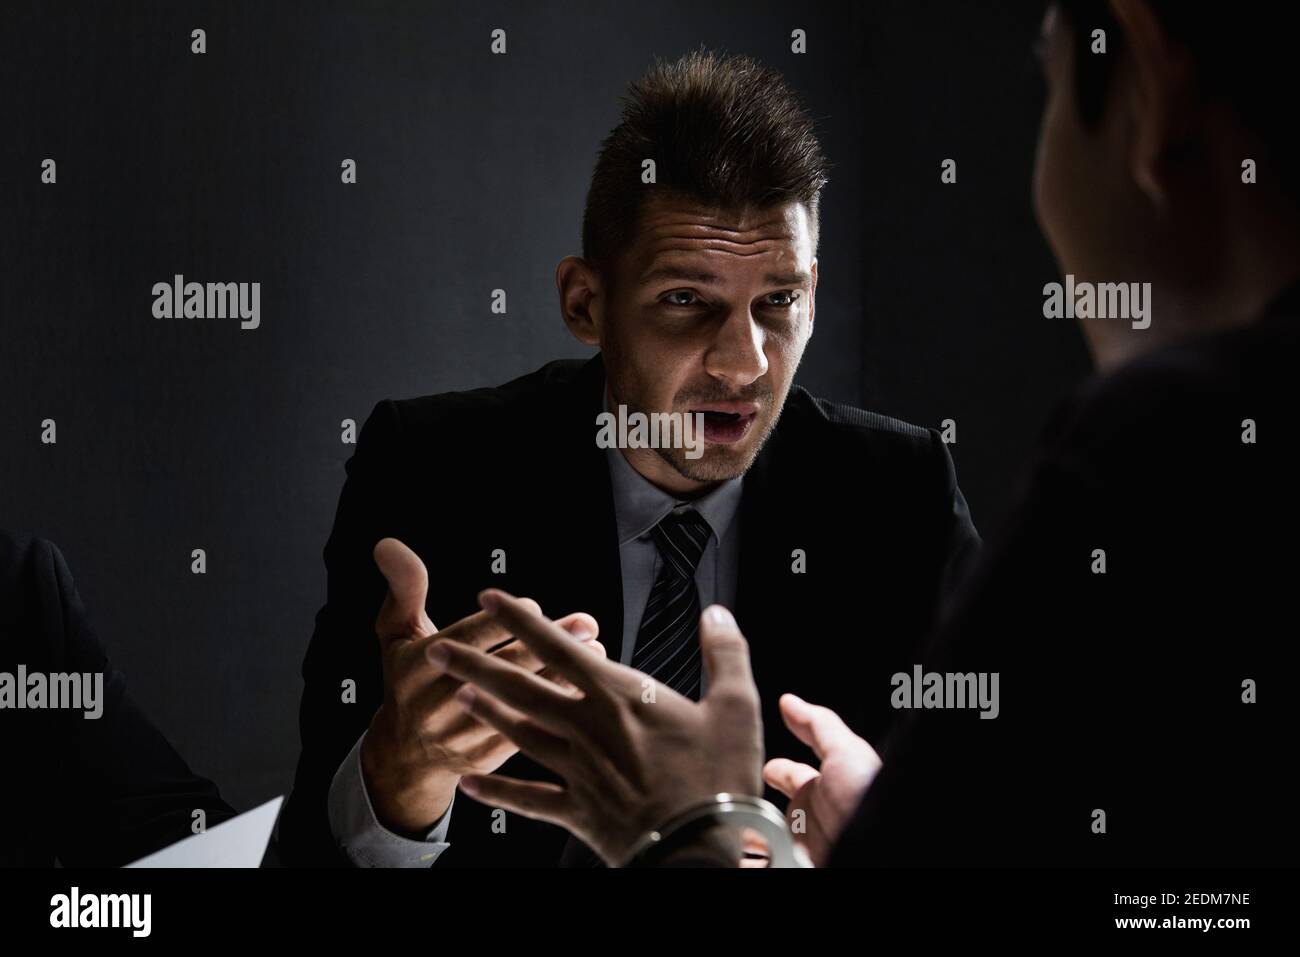 Suspect or criminal man with handcuffs being interviewed by detectives in interrogation room after committed a crime Stock Photo